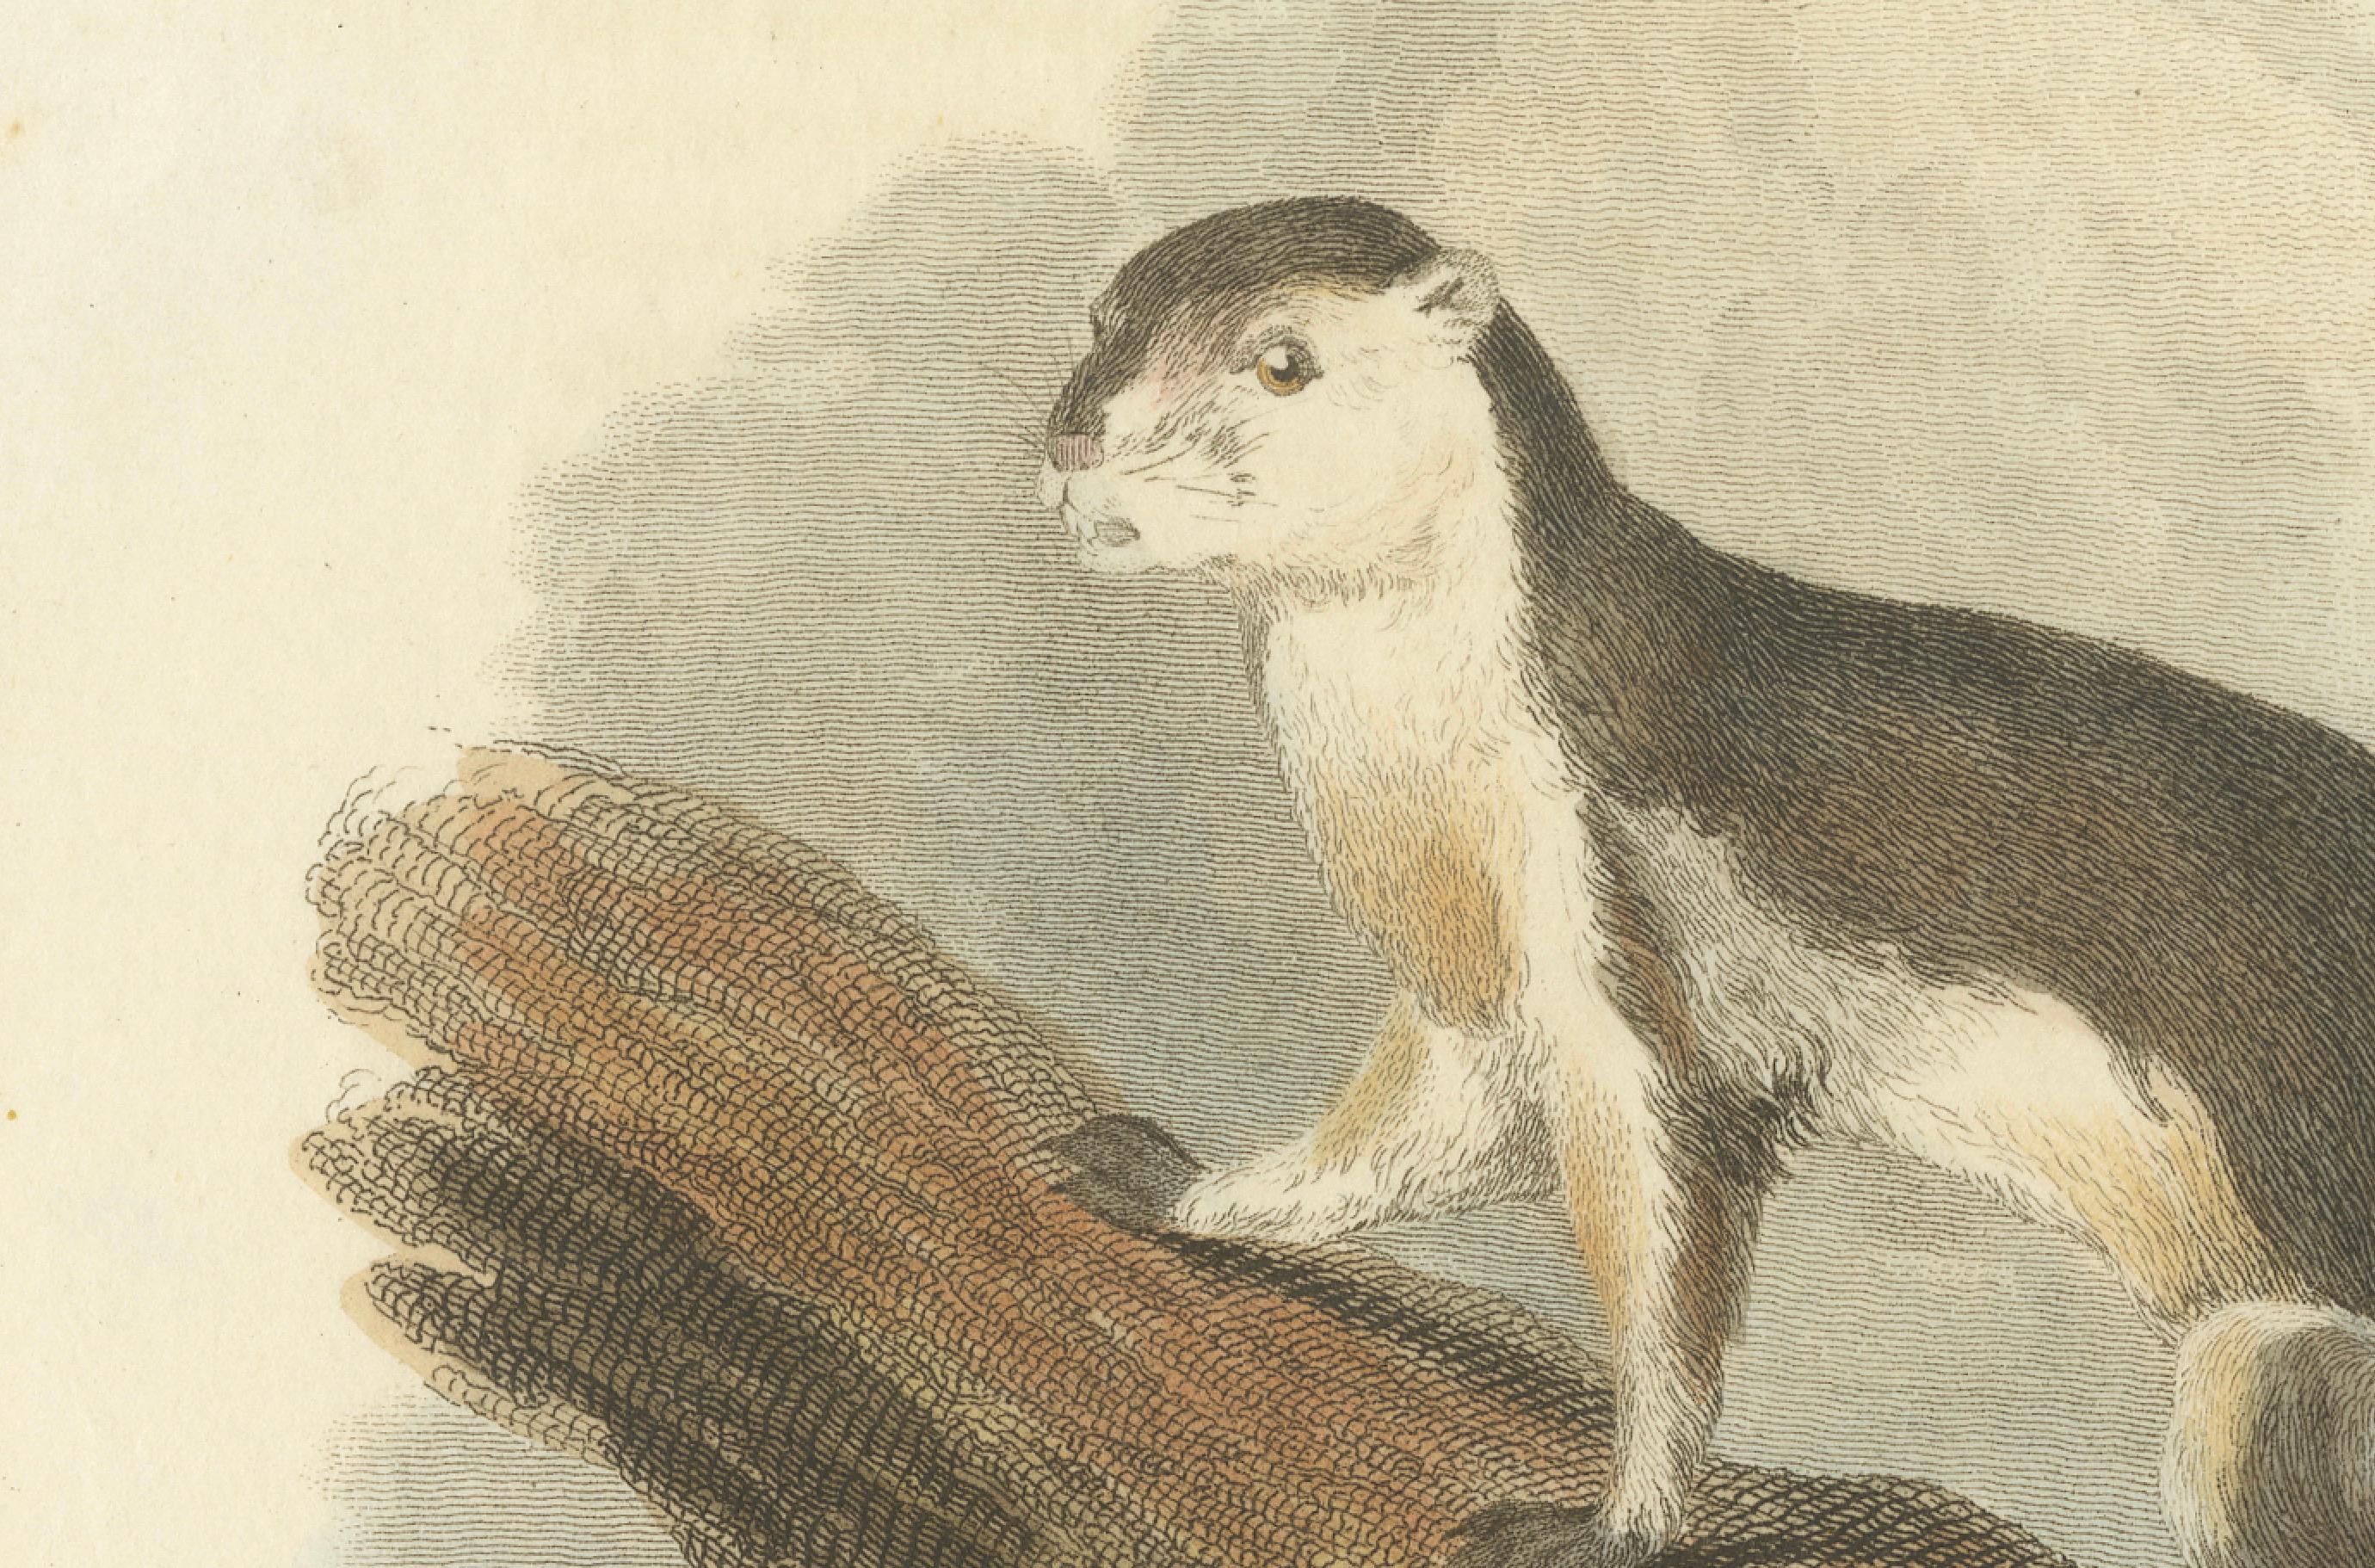 The image depicts an antique print of the black giant squirrel, also known as the Malayan giant squirrel (scientific name: Ratufa bicolor). This print is particularly historical and valuable because it comes from an era when wildlife illustrations